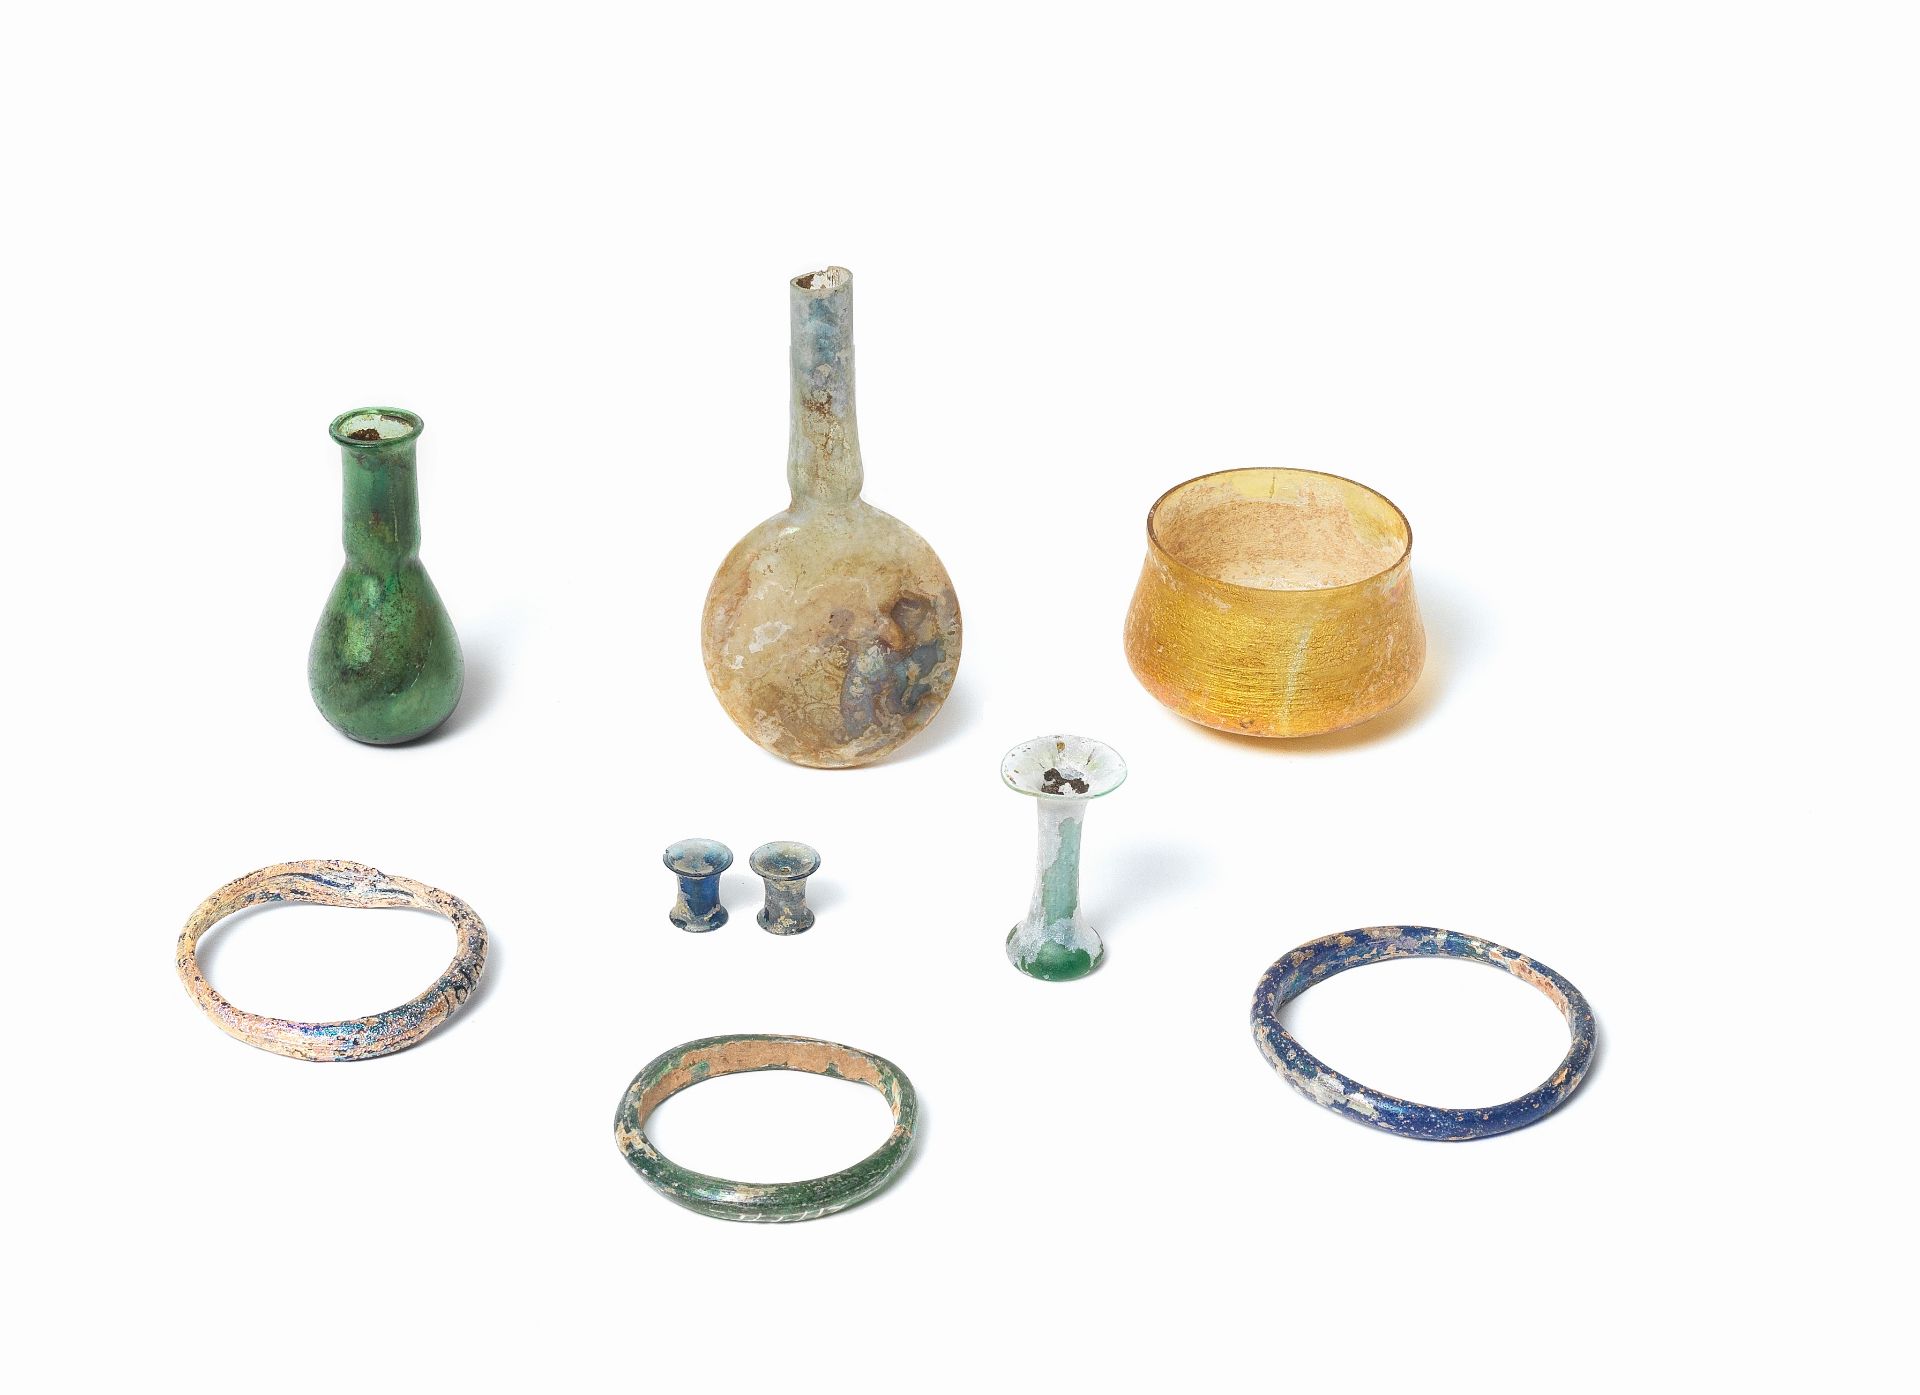 A group of seven Roman glass artefacts and a pair of Chinese blue glass ear ornaments, 9